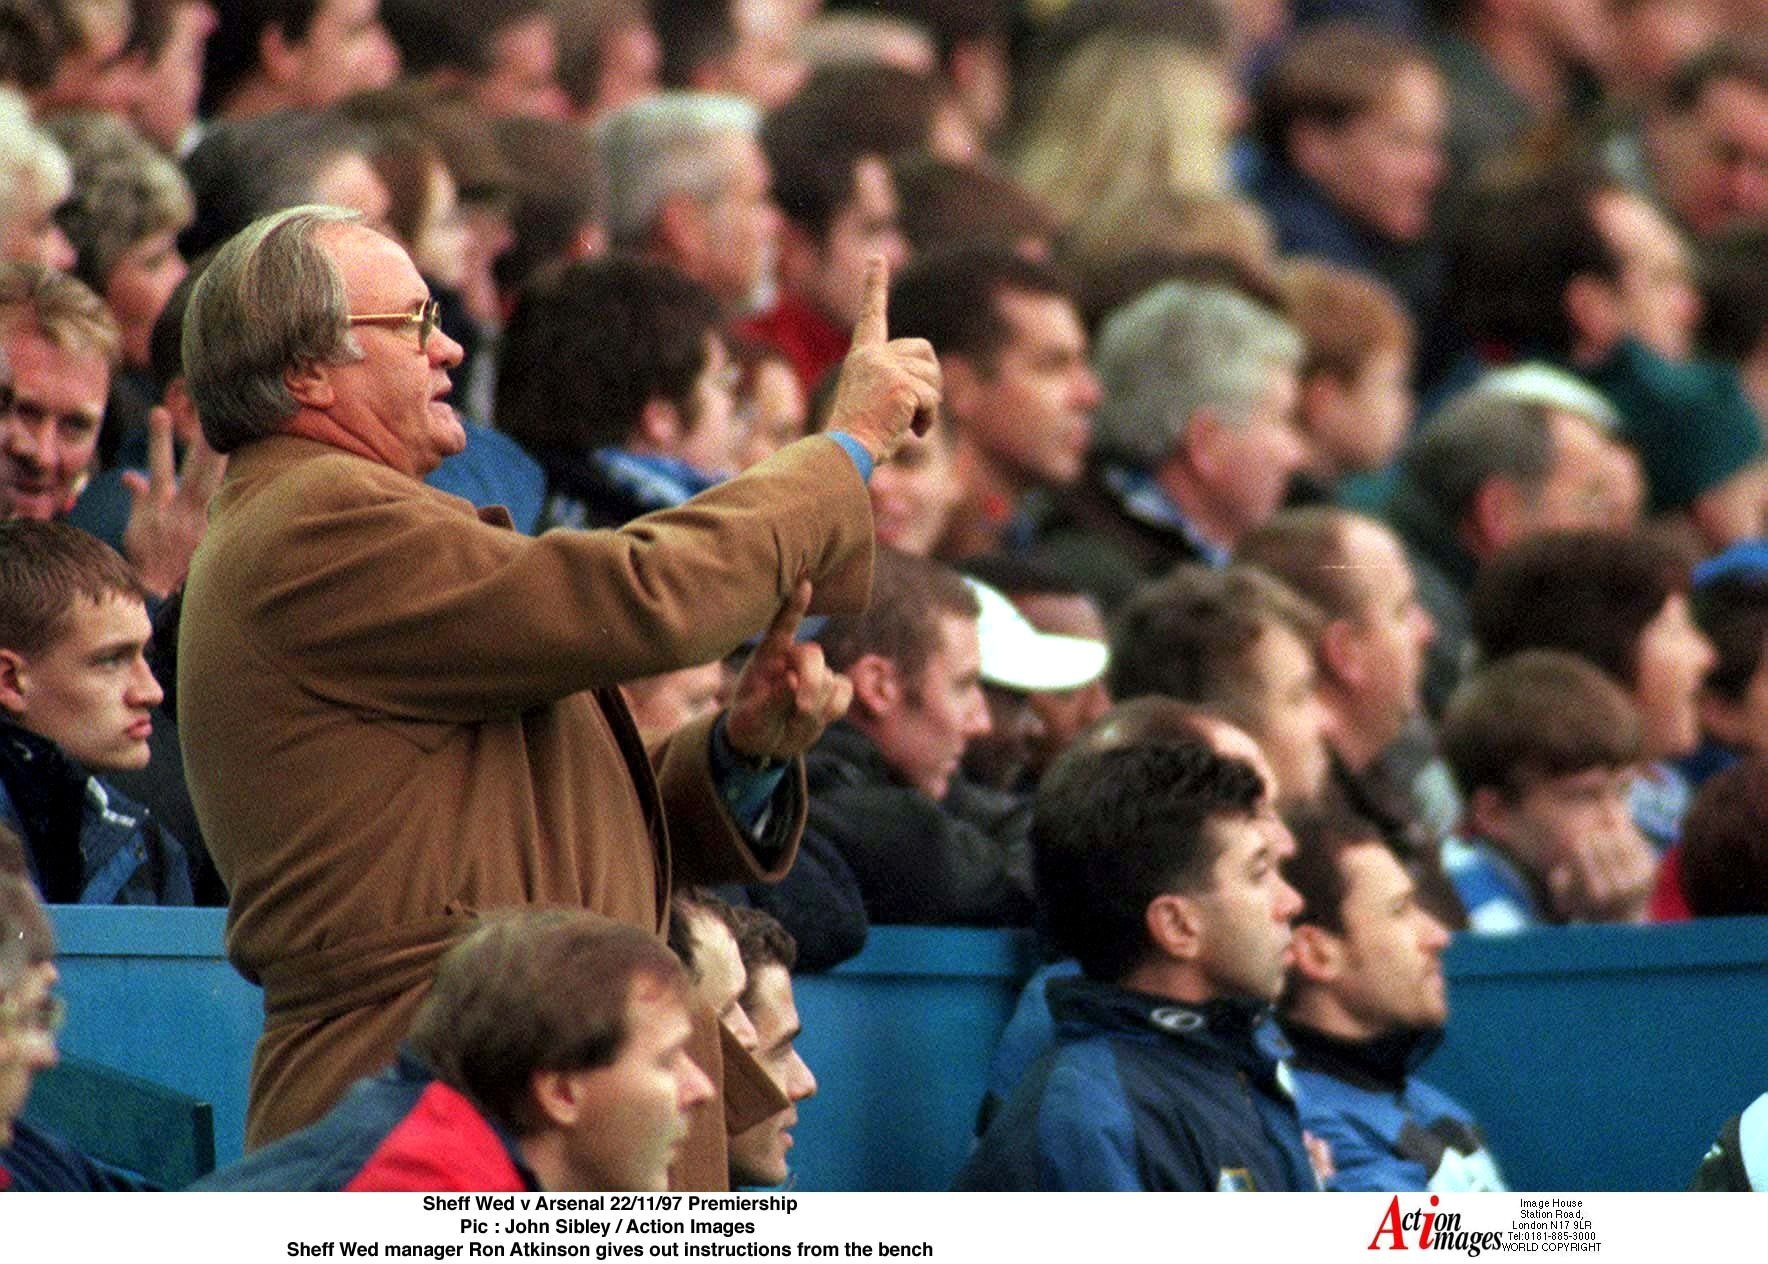 Sheffield  Wednesday v Arsenal 22/11/97 FA Premier League  
Pic : John Sibley / Action Images  
Sheff Wed manager Ron Atkinson gives out instructions from the bench